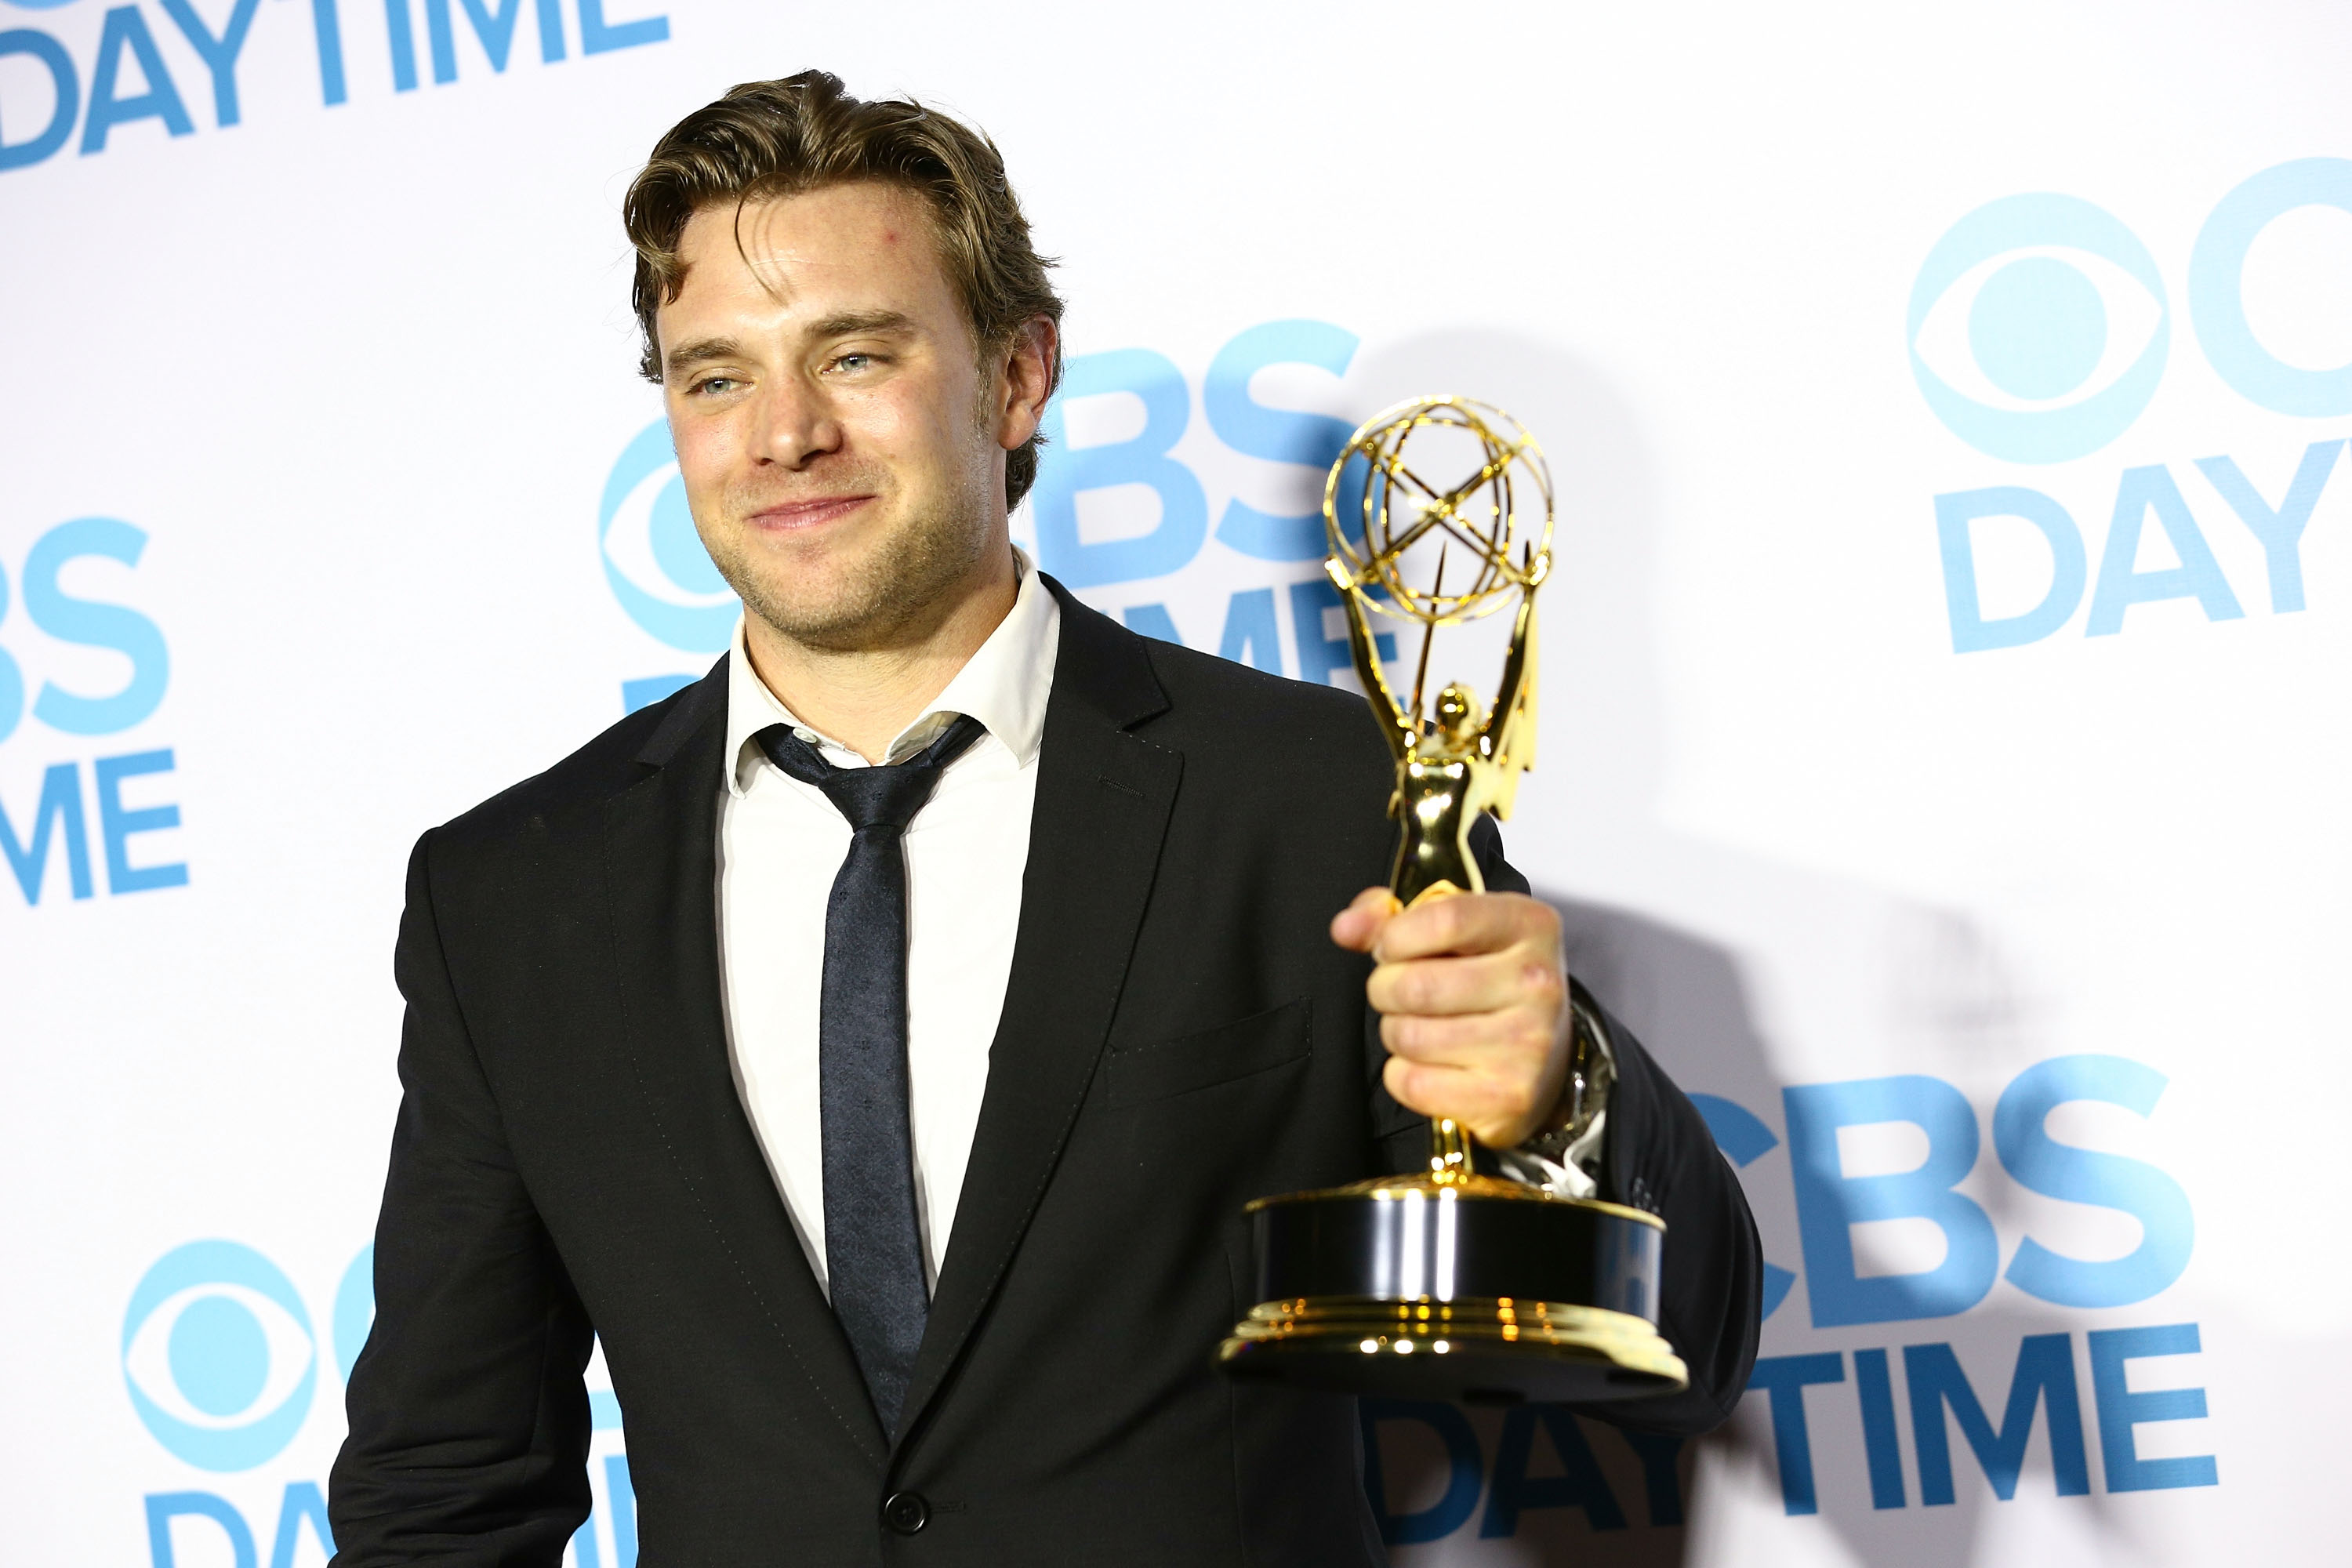 Billy Miller star of The Young and the Restless dies at 43